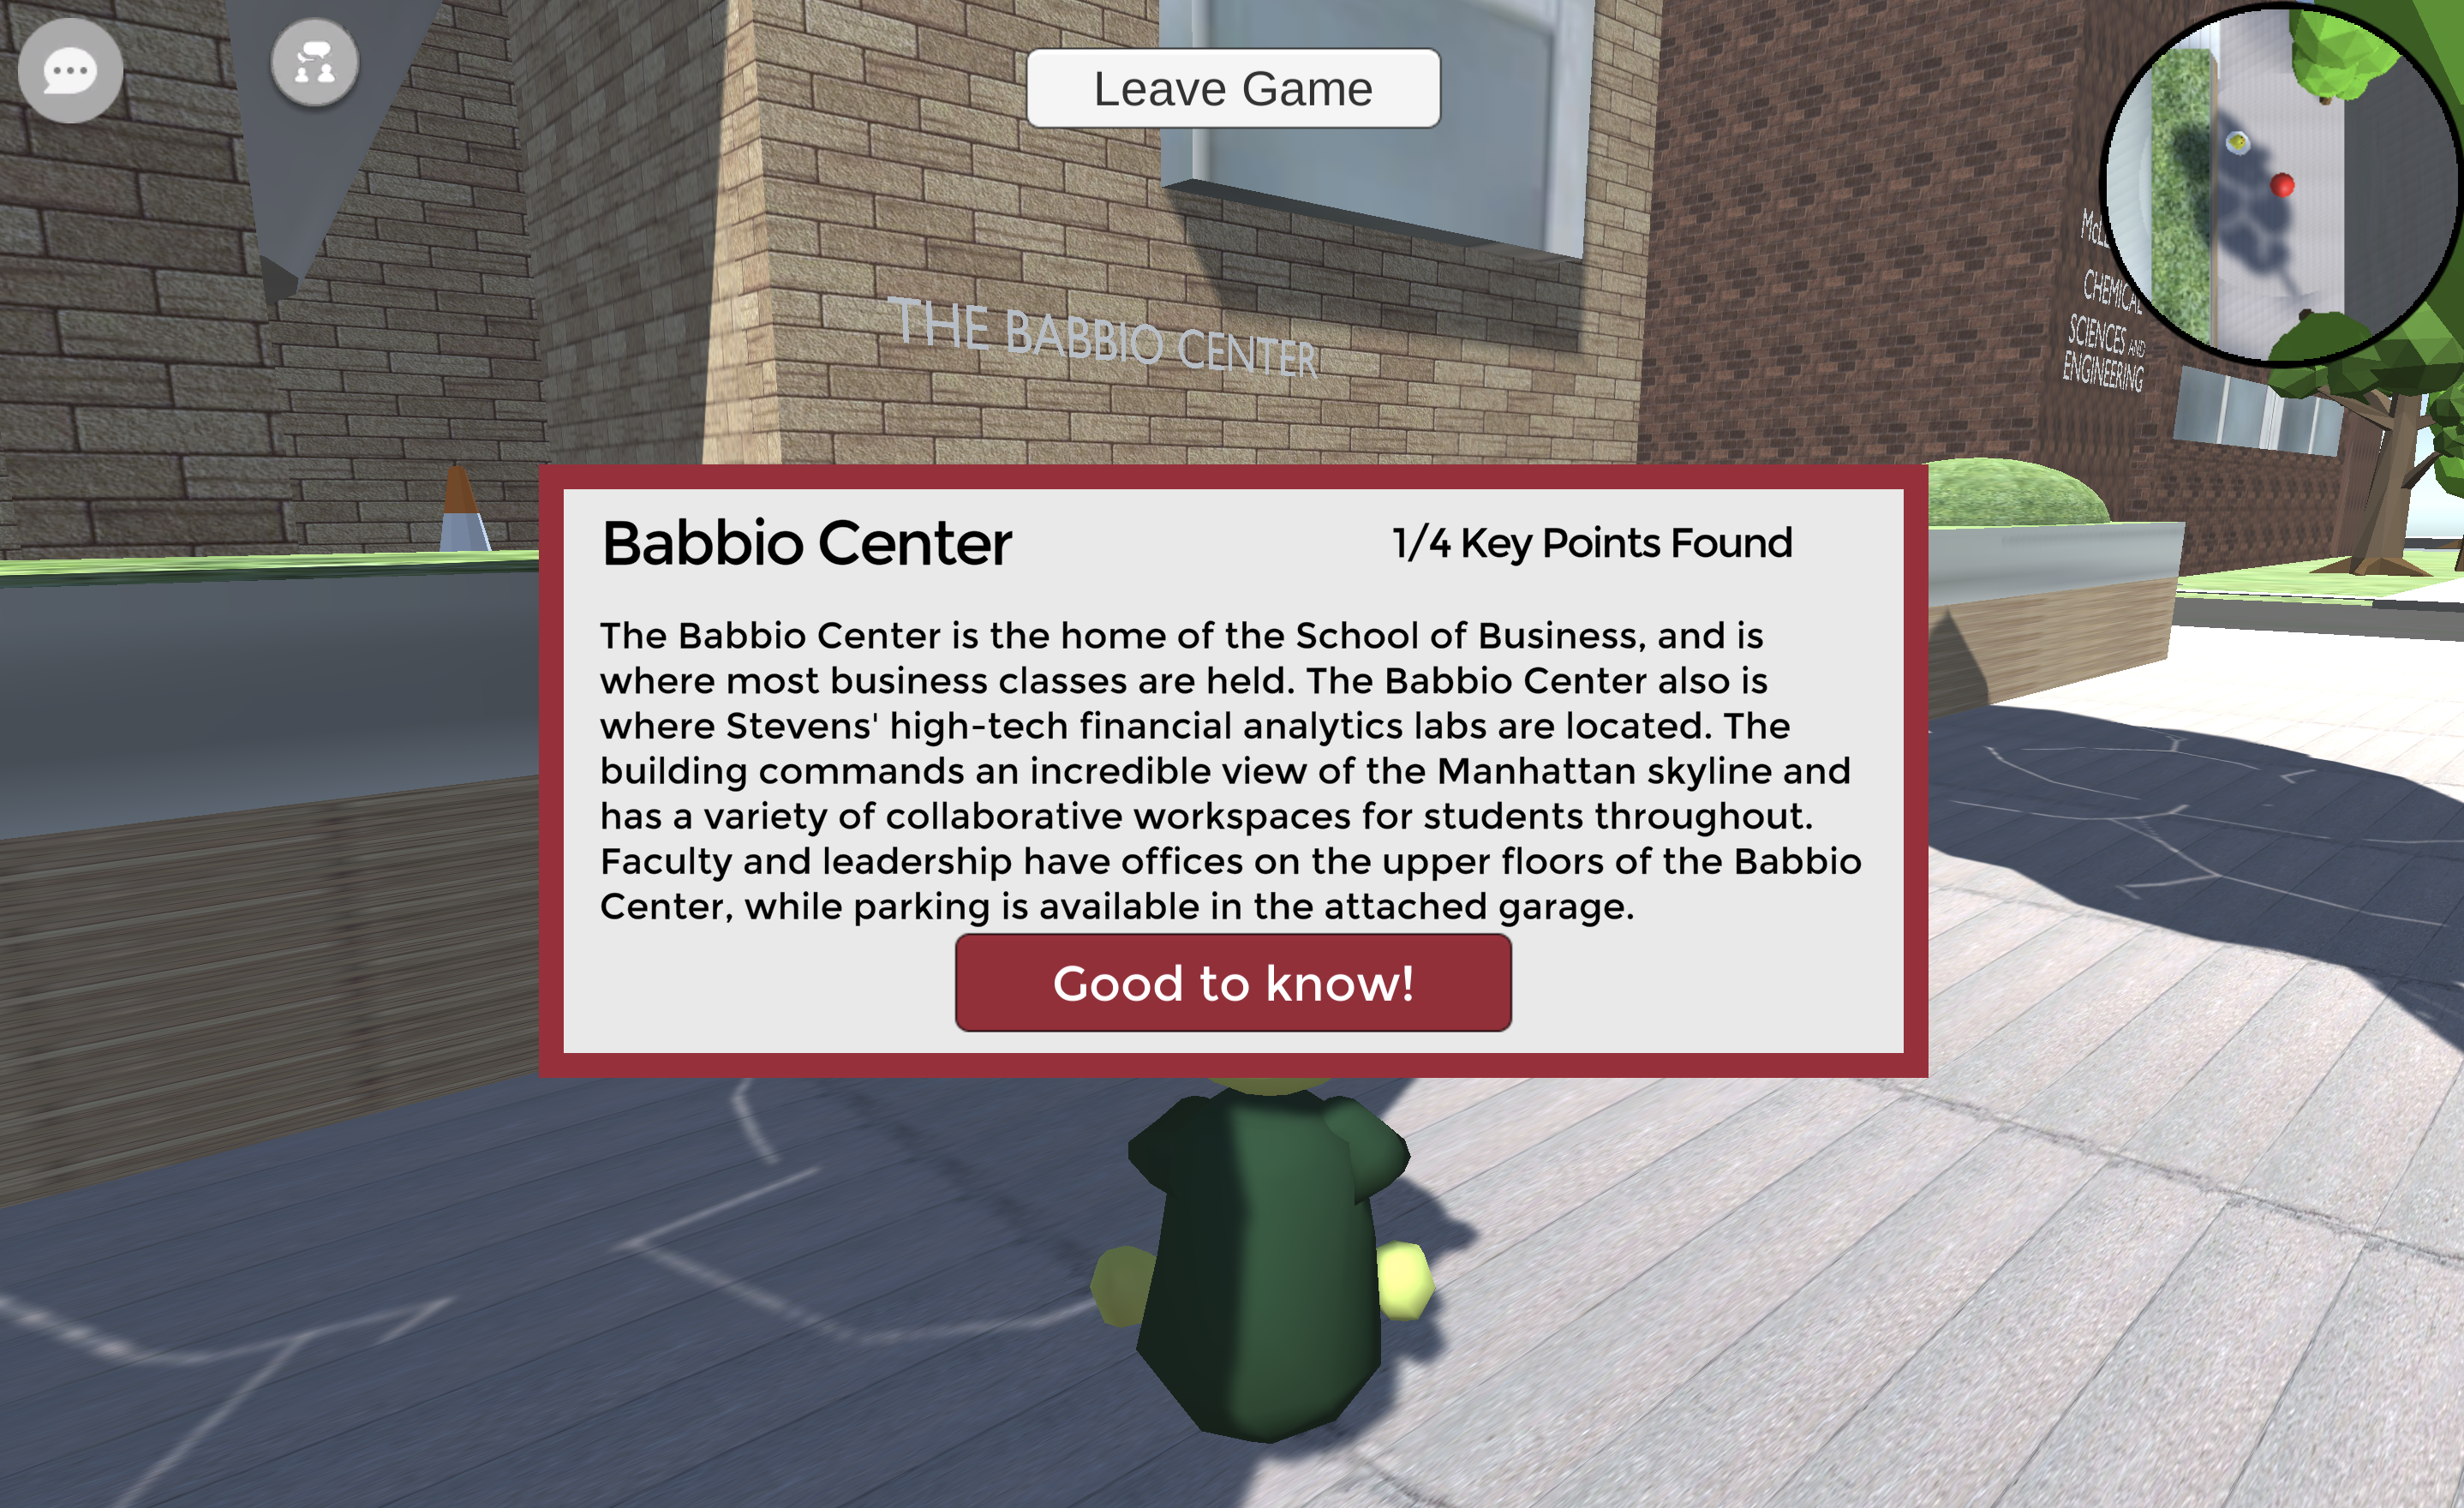 Delphi Public Library - Join us this Friday to play Roblox! For